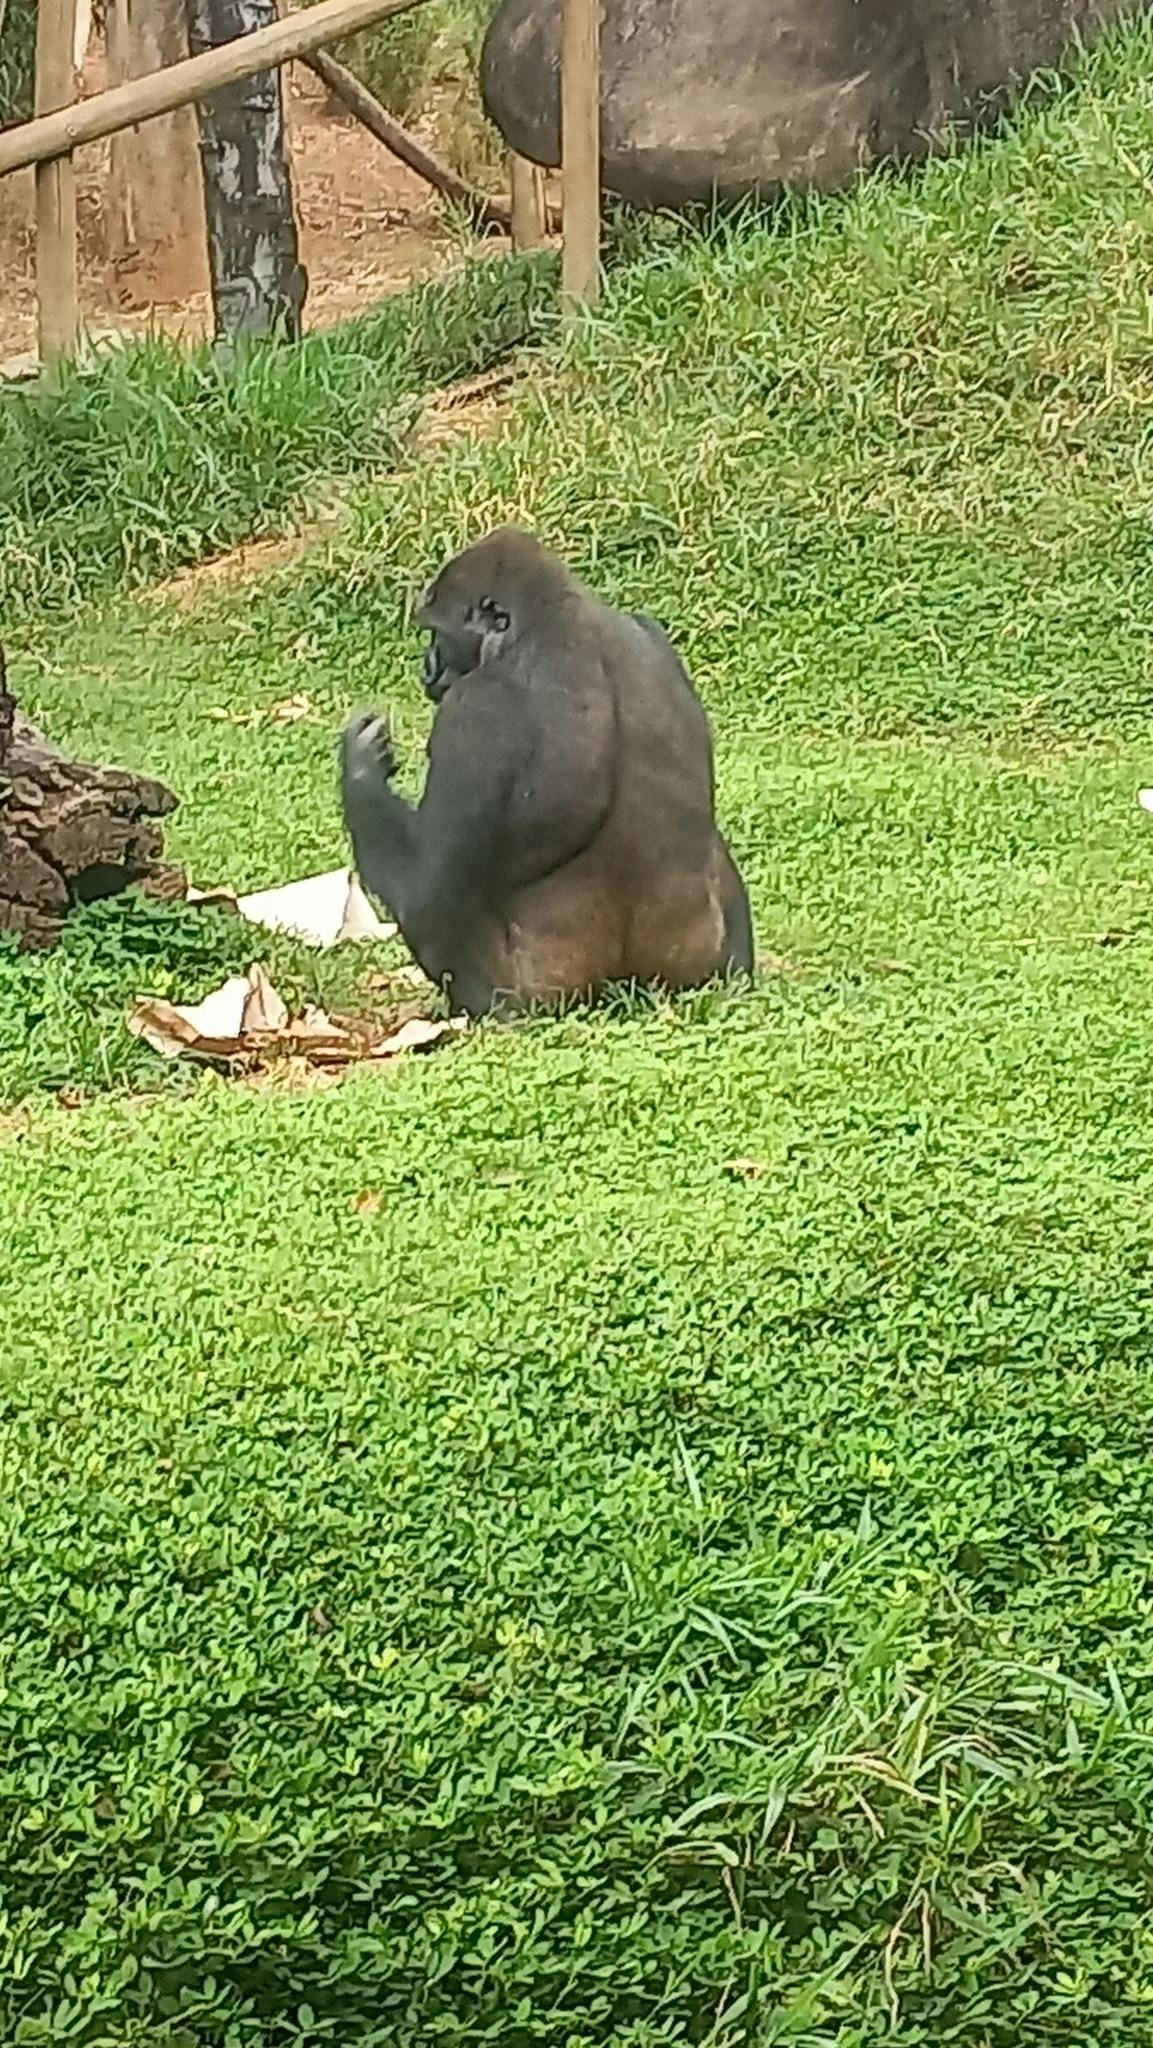 a big black gorilla eating with his back to the camera sitting on the grass